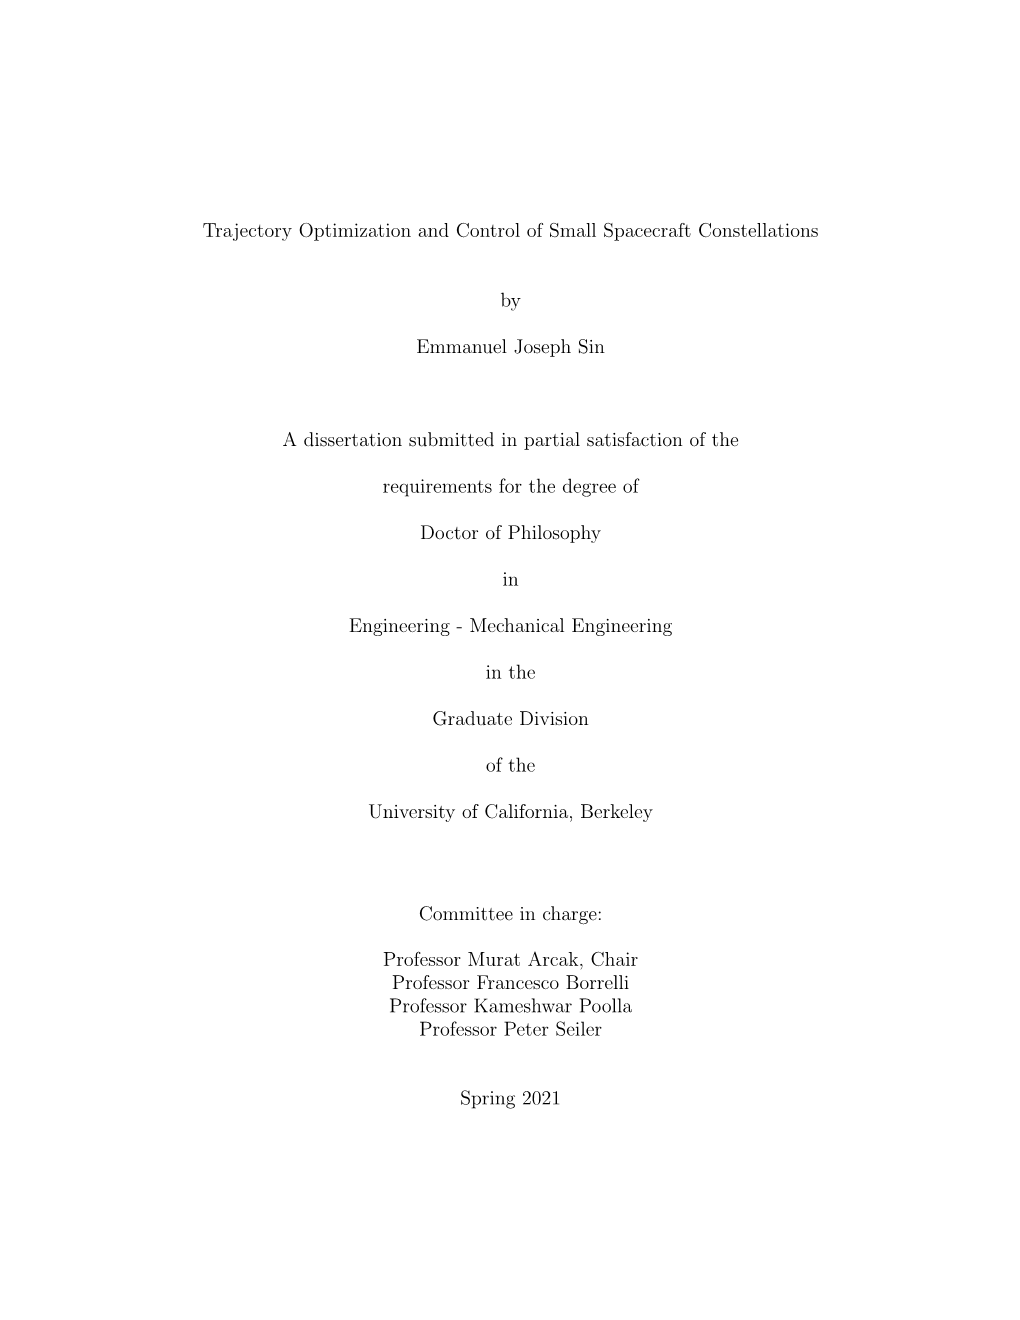 Trajectory Optimization and Control of Small Spacecraft Constellations by Emmanuel Joseph Sin a Dissertation Submitted in Partia